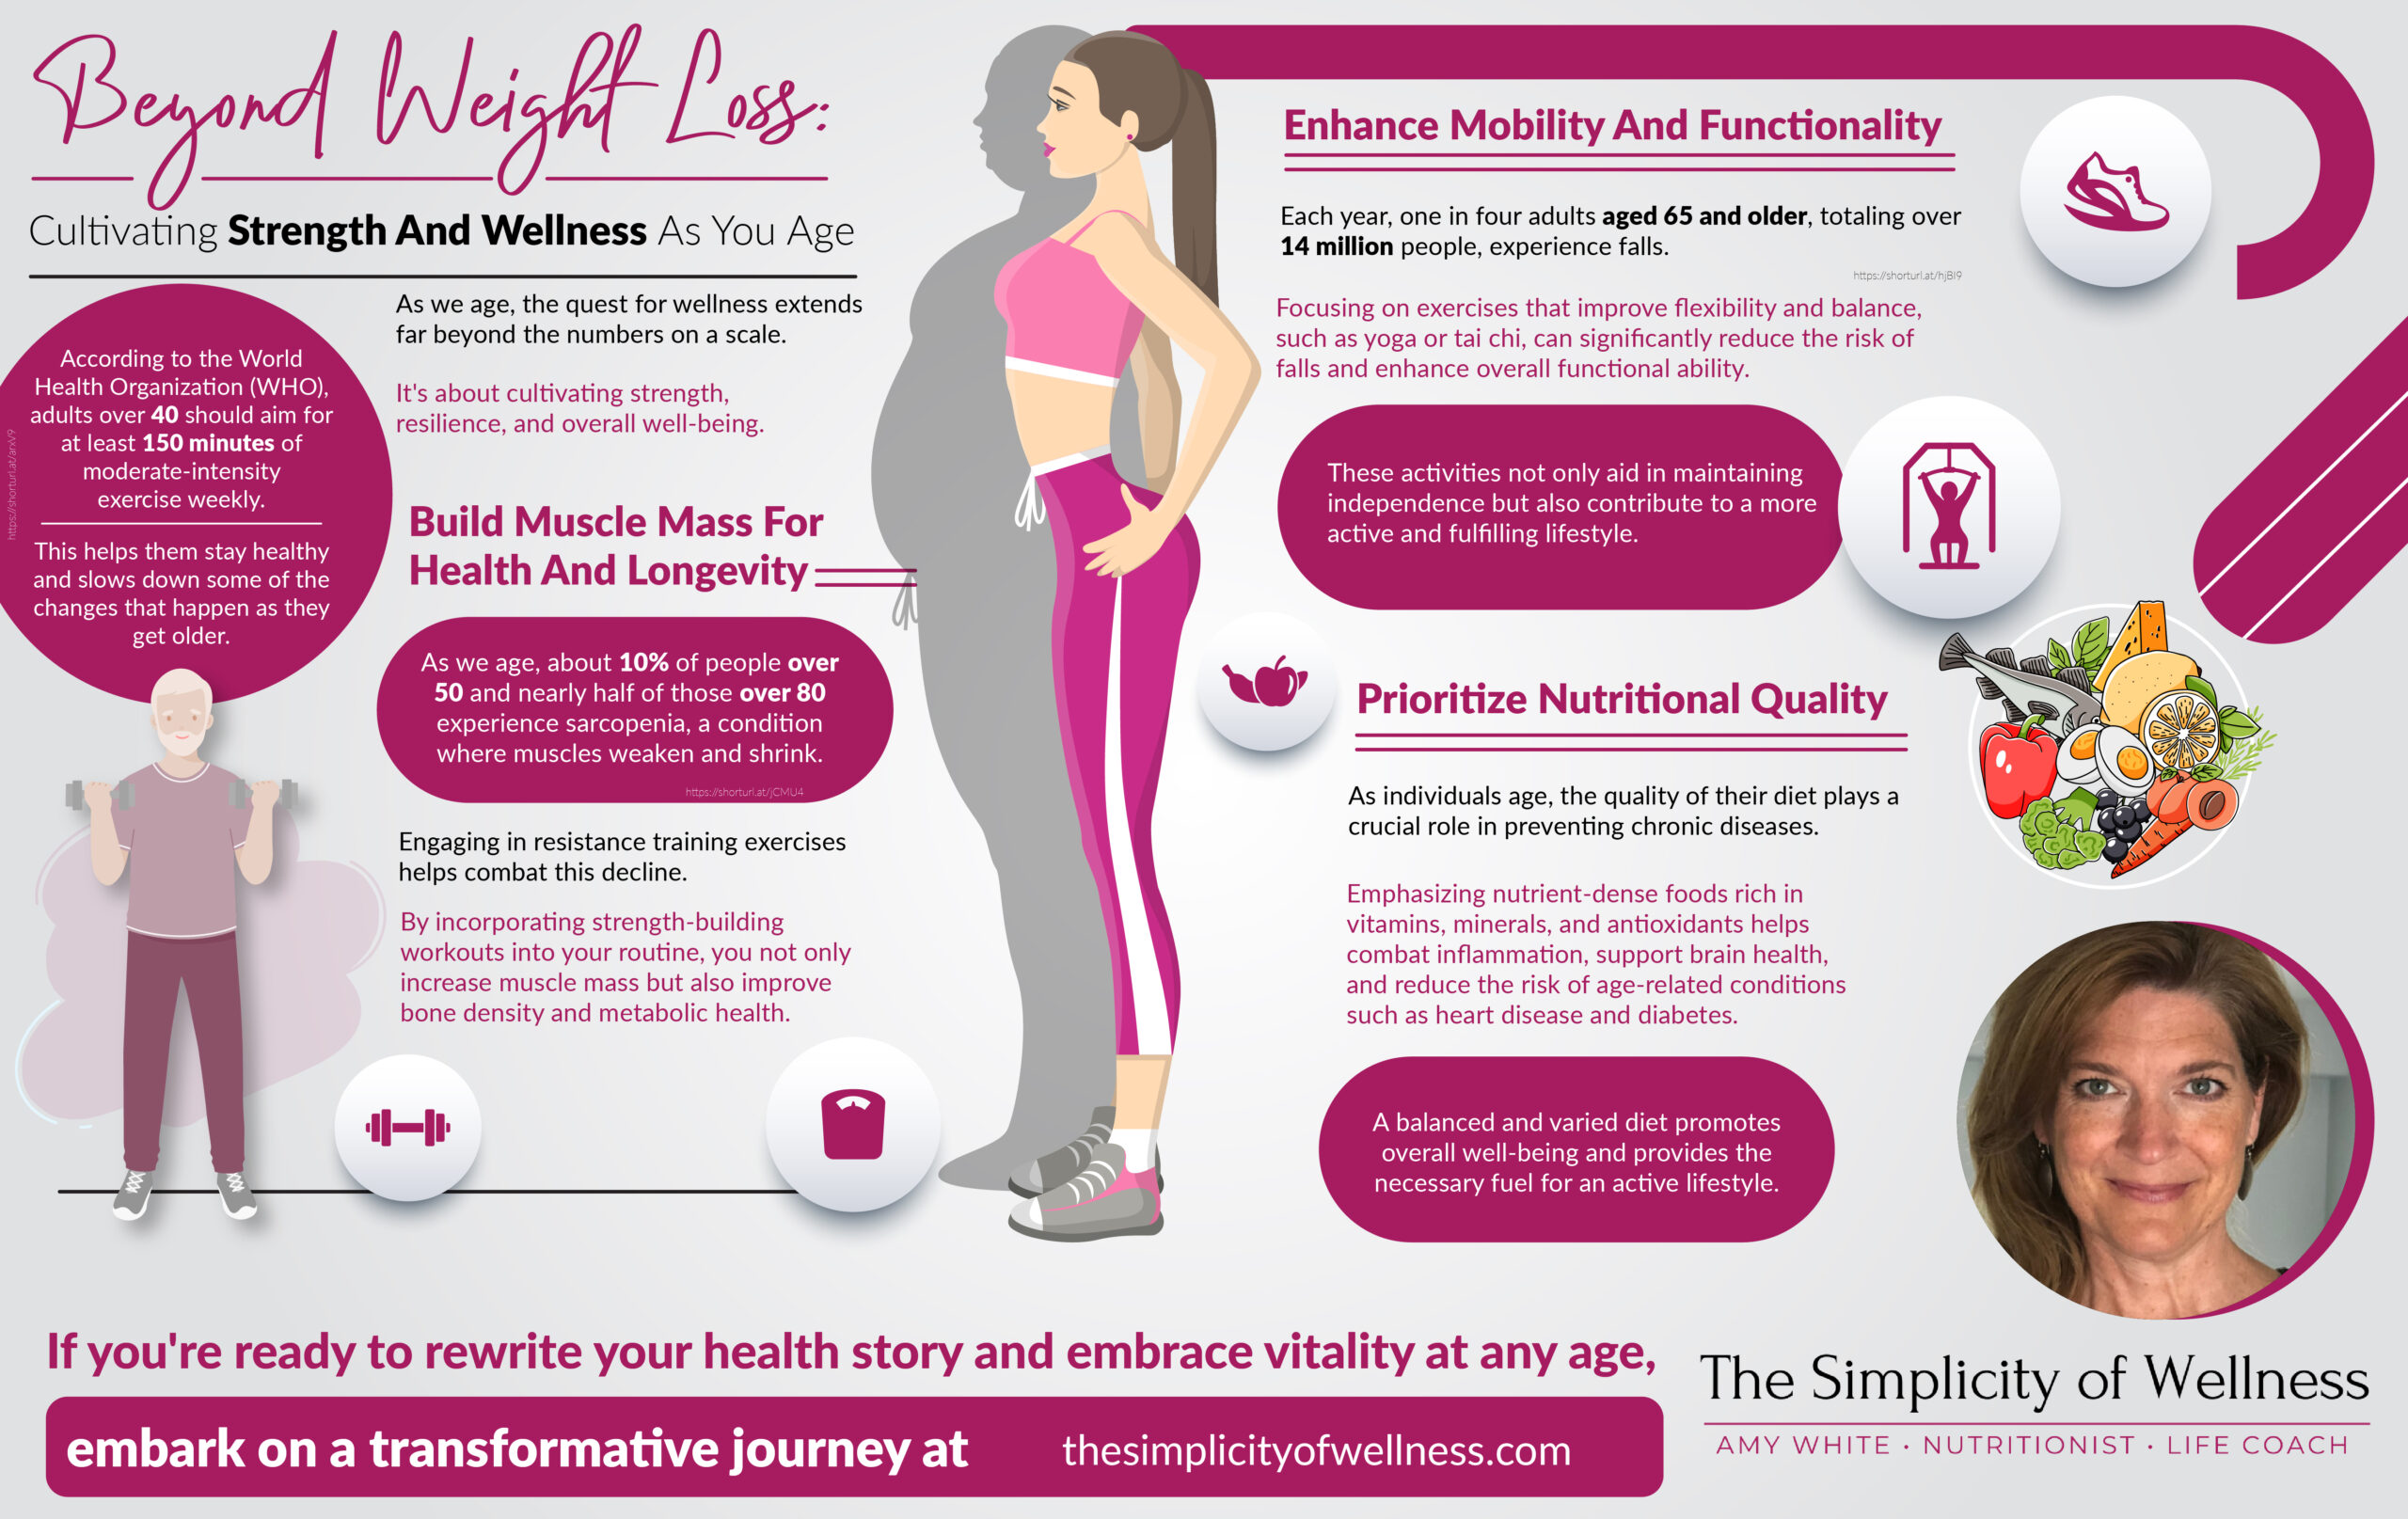 Beyond Weight Loss: Cultivating Strength and Wellness as You Age-INFOGRAPHIC